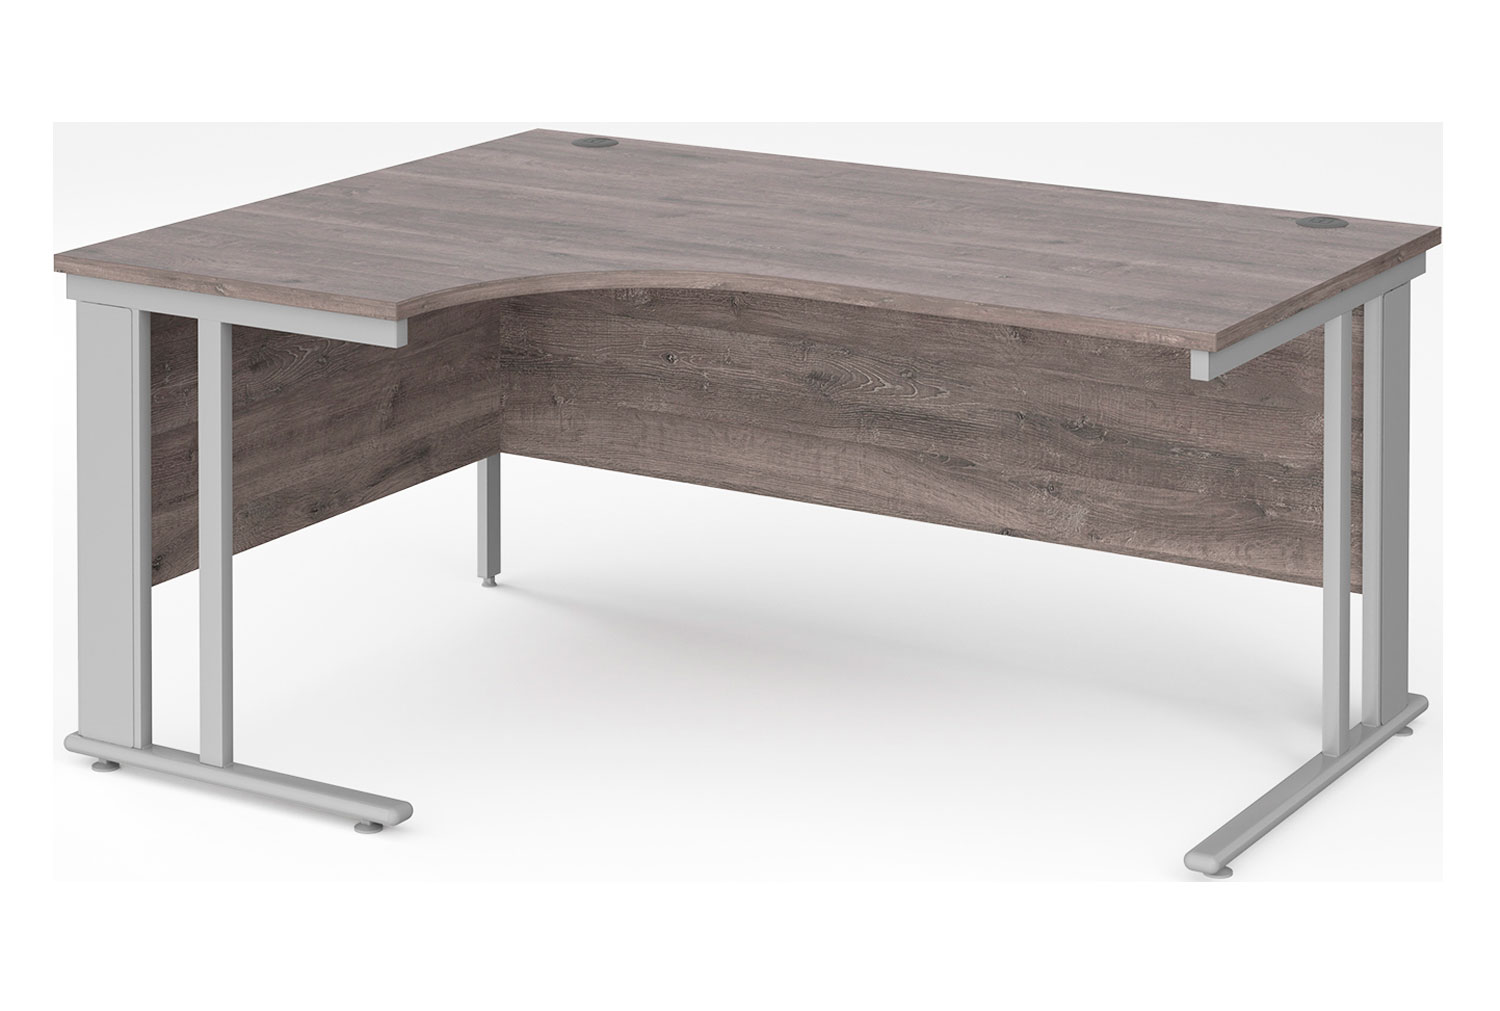 Value Line Deluxe Cable Managed Left Hand Ergo Office Desk (Silver Legs), 160wx120/80dx73h (cm), Grey Oak, Express Delivery